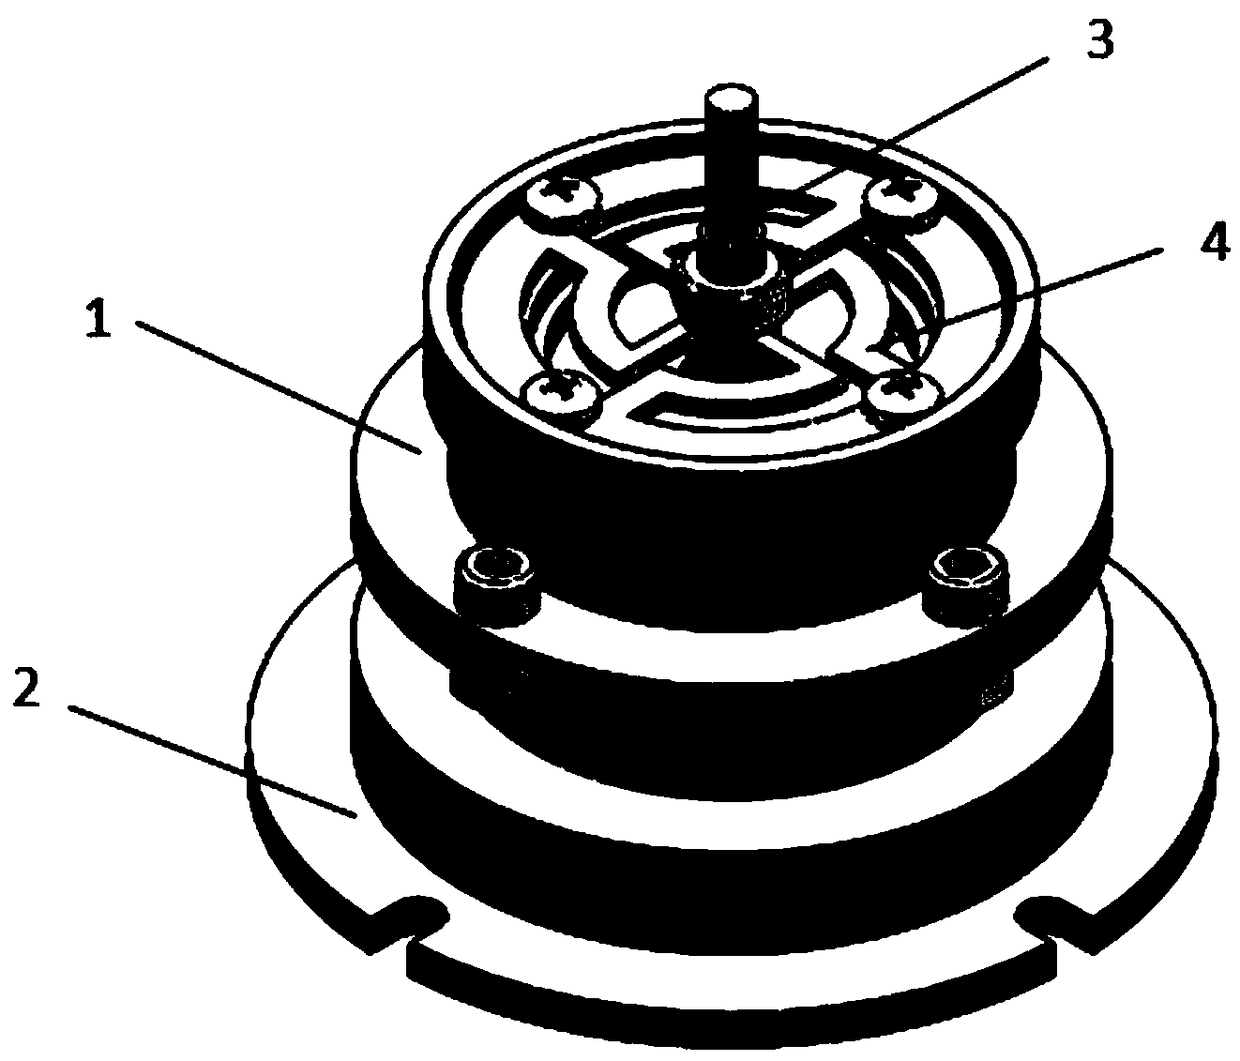 Quasi-zero stiffness vibration isolator with positive and negative stiffness in parallel connection